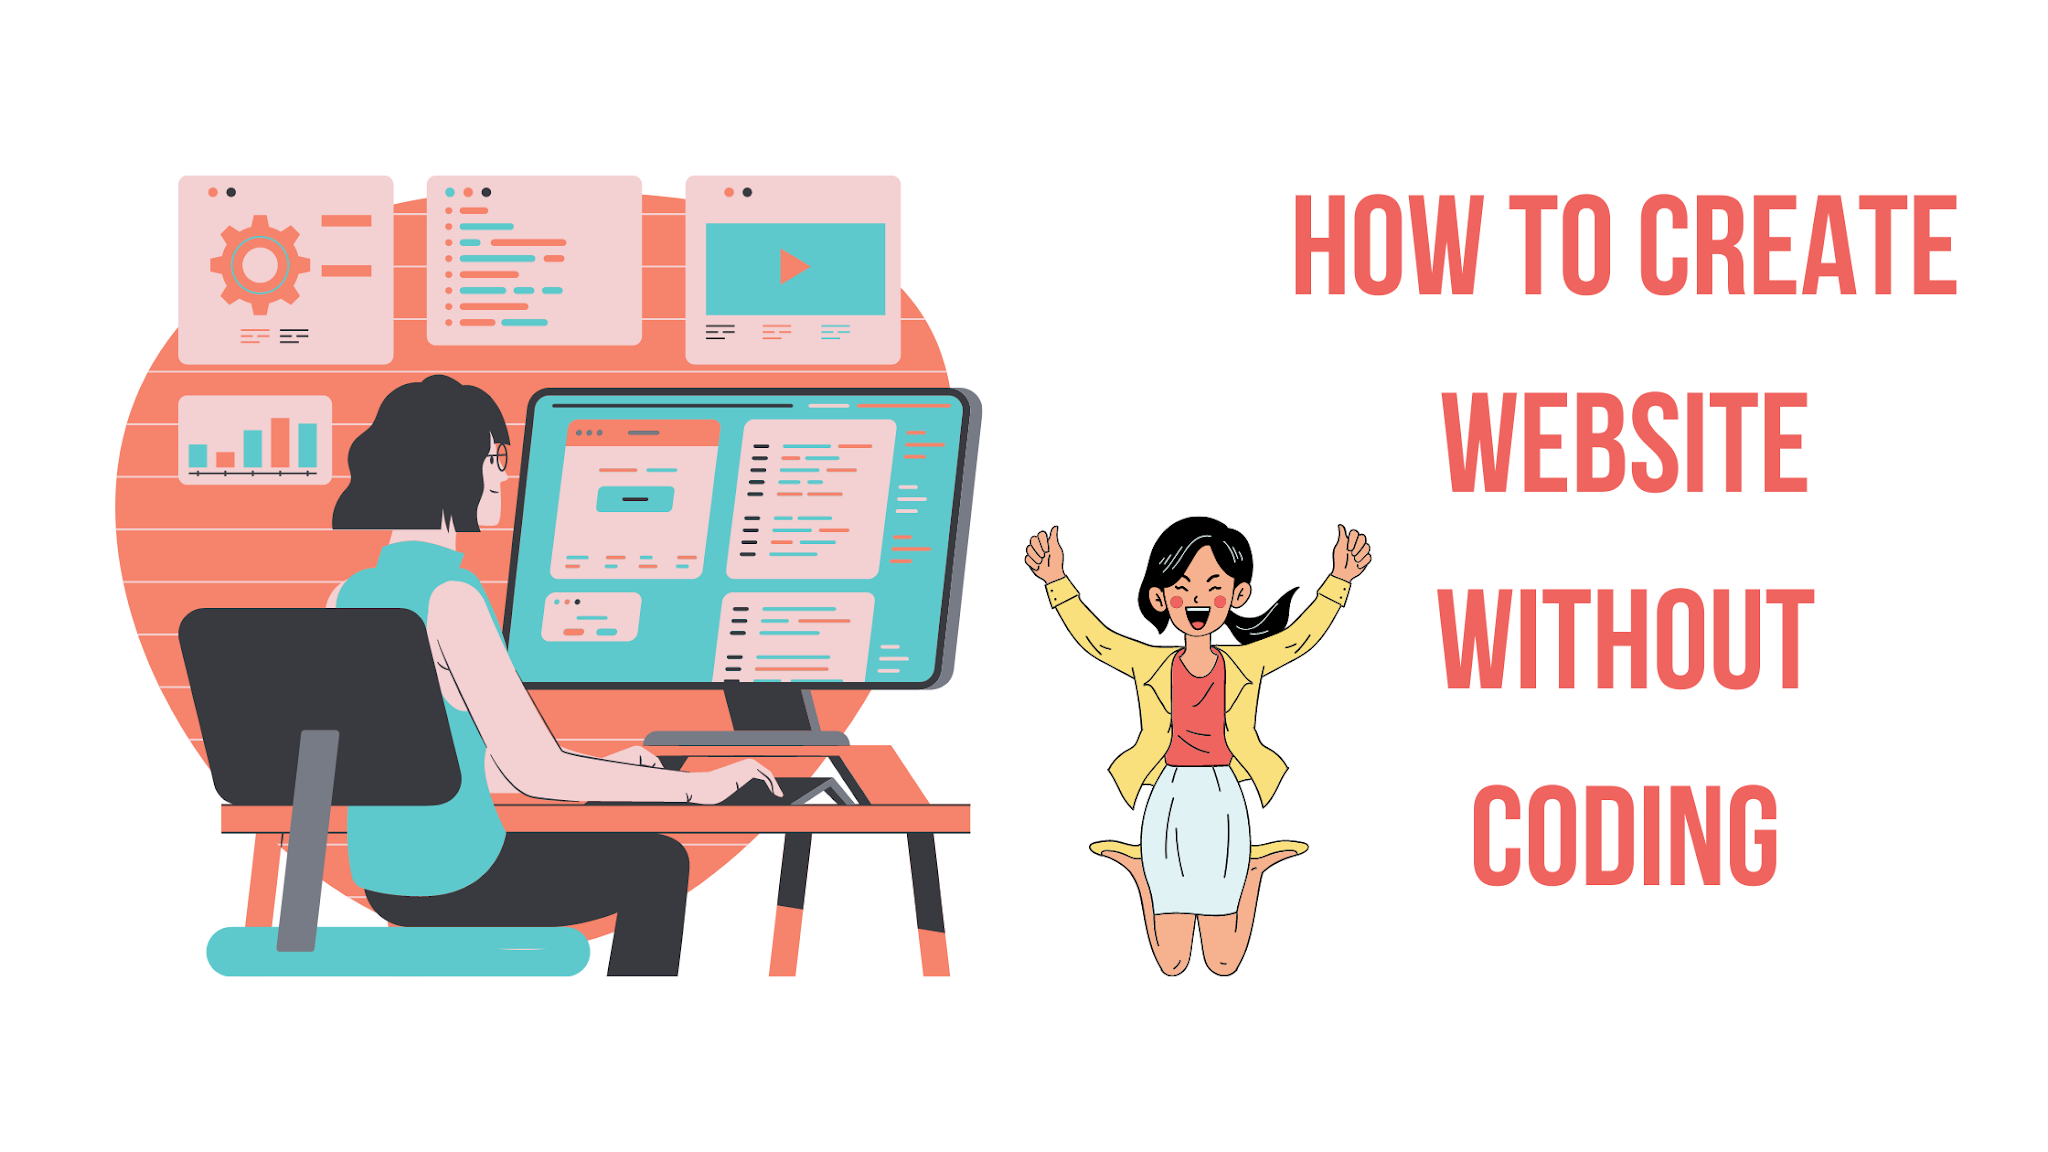 Create a Website Without Coding